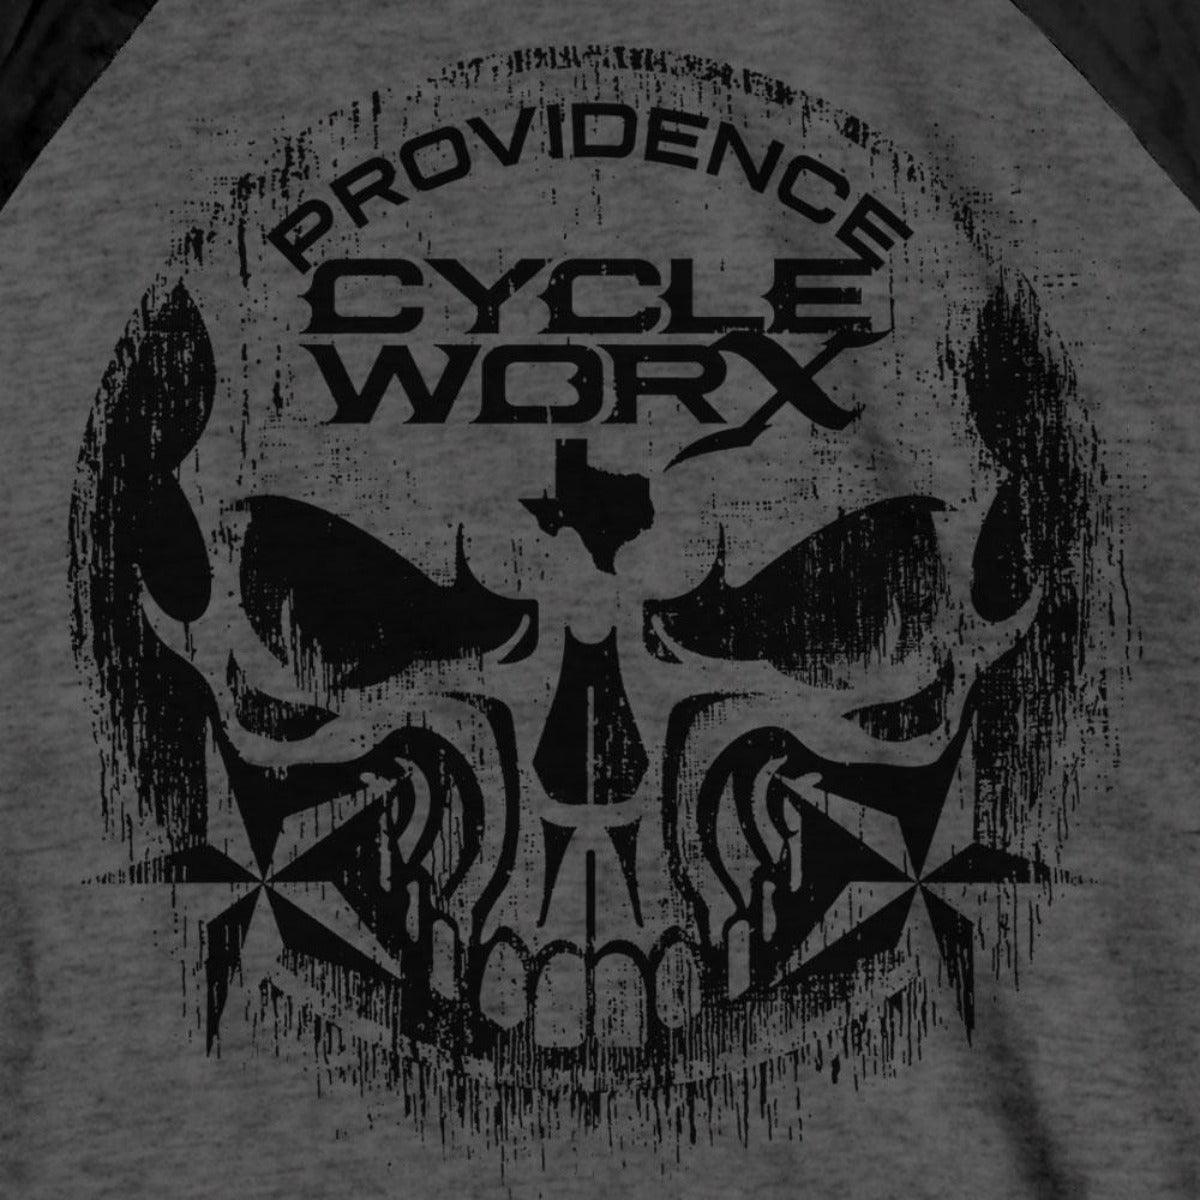 Hot Leathers Men's Official Providence Cycle Worx Skull Raglan 3/4 Sleeve - American Legend Rider